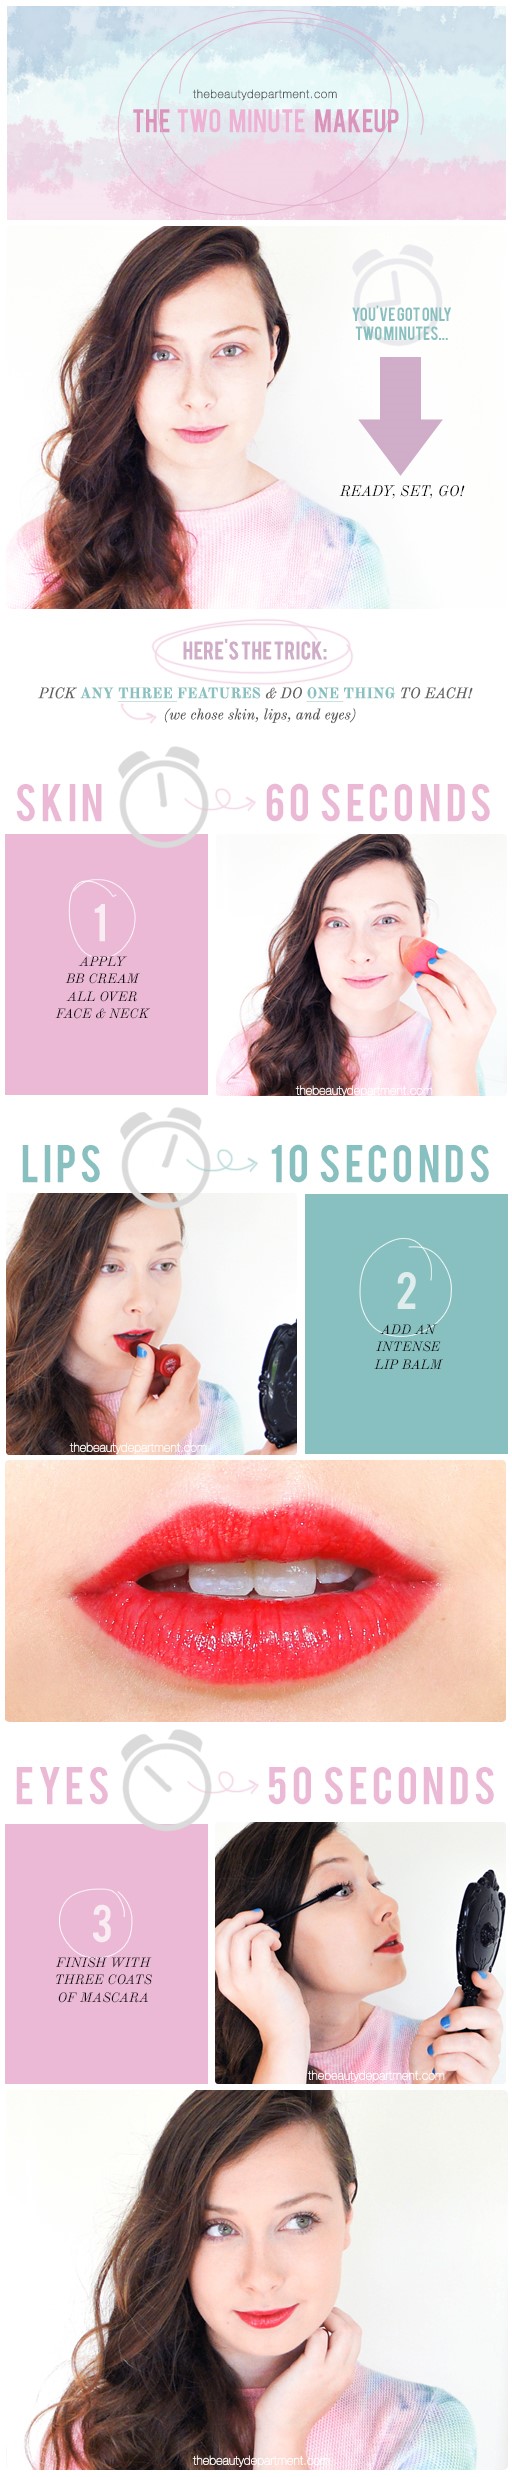 TUTORIAL + PHOTOGRAPHY BY AMY NADINE, GRAPHIC DESIGN BY EUNICE CHUN